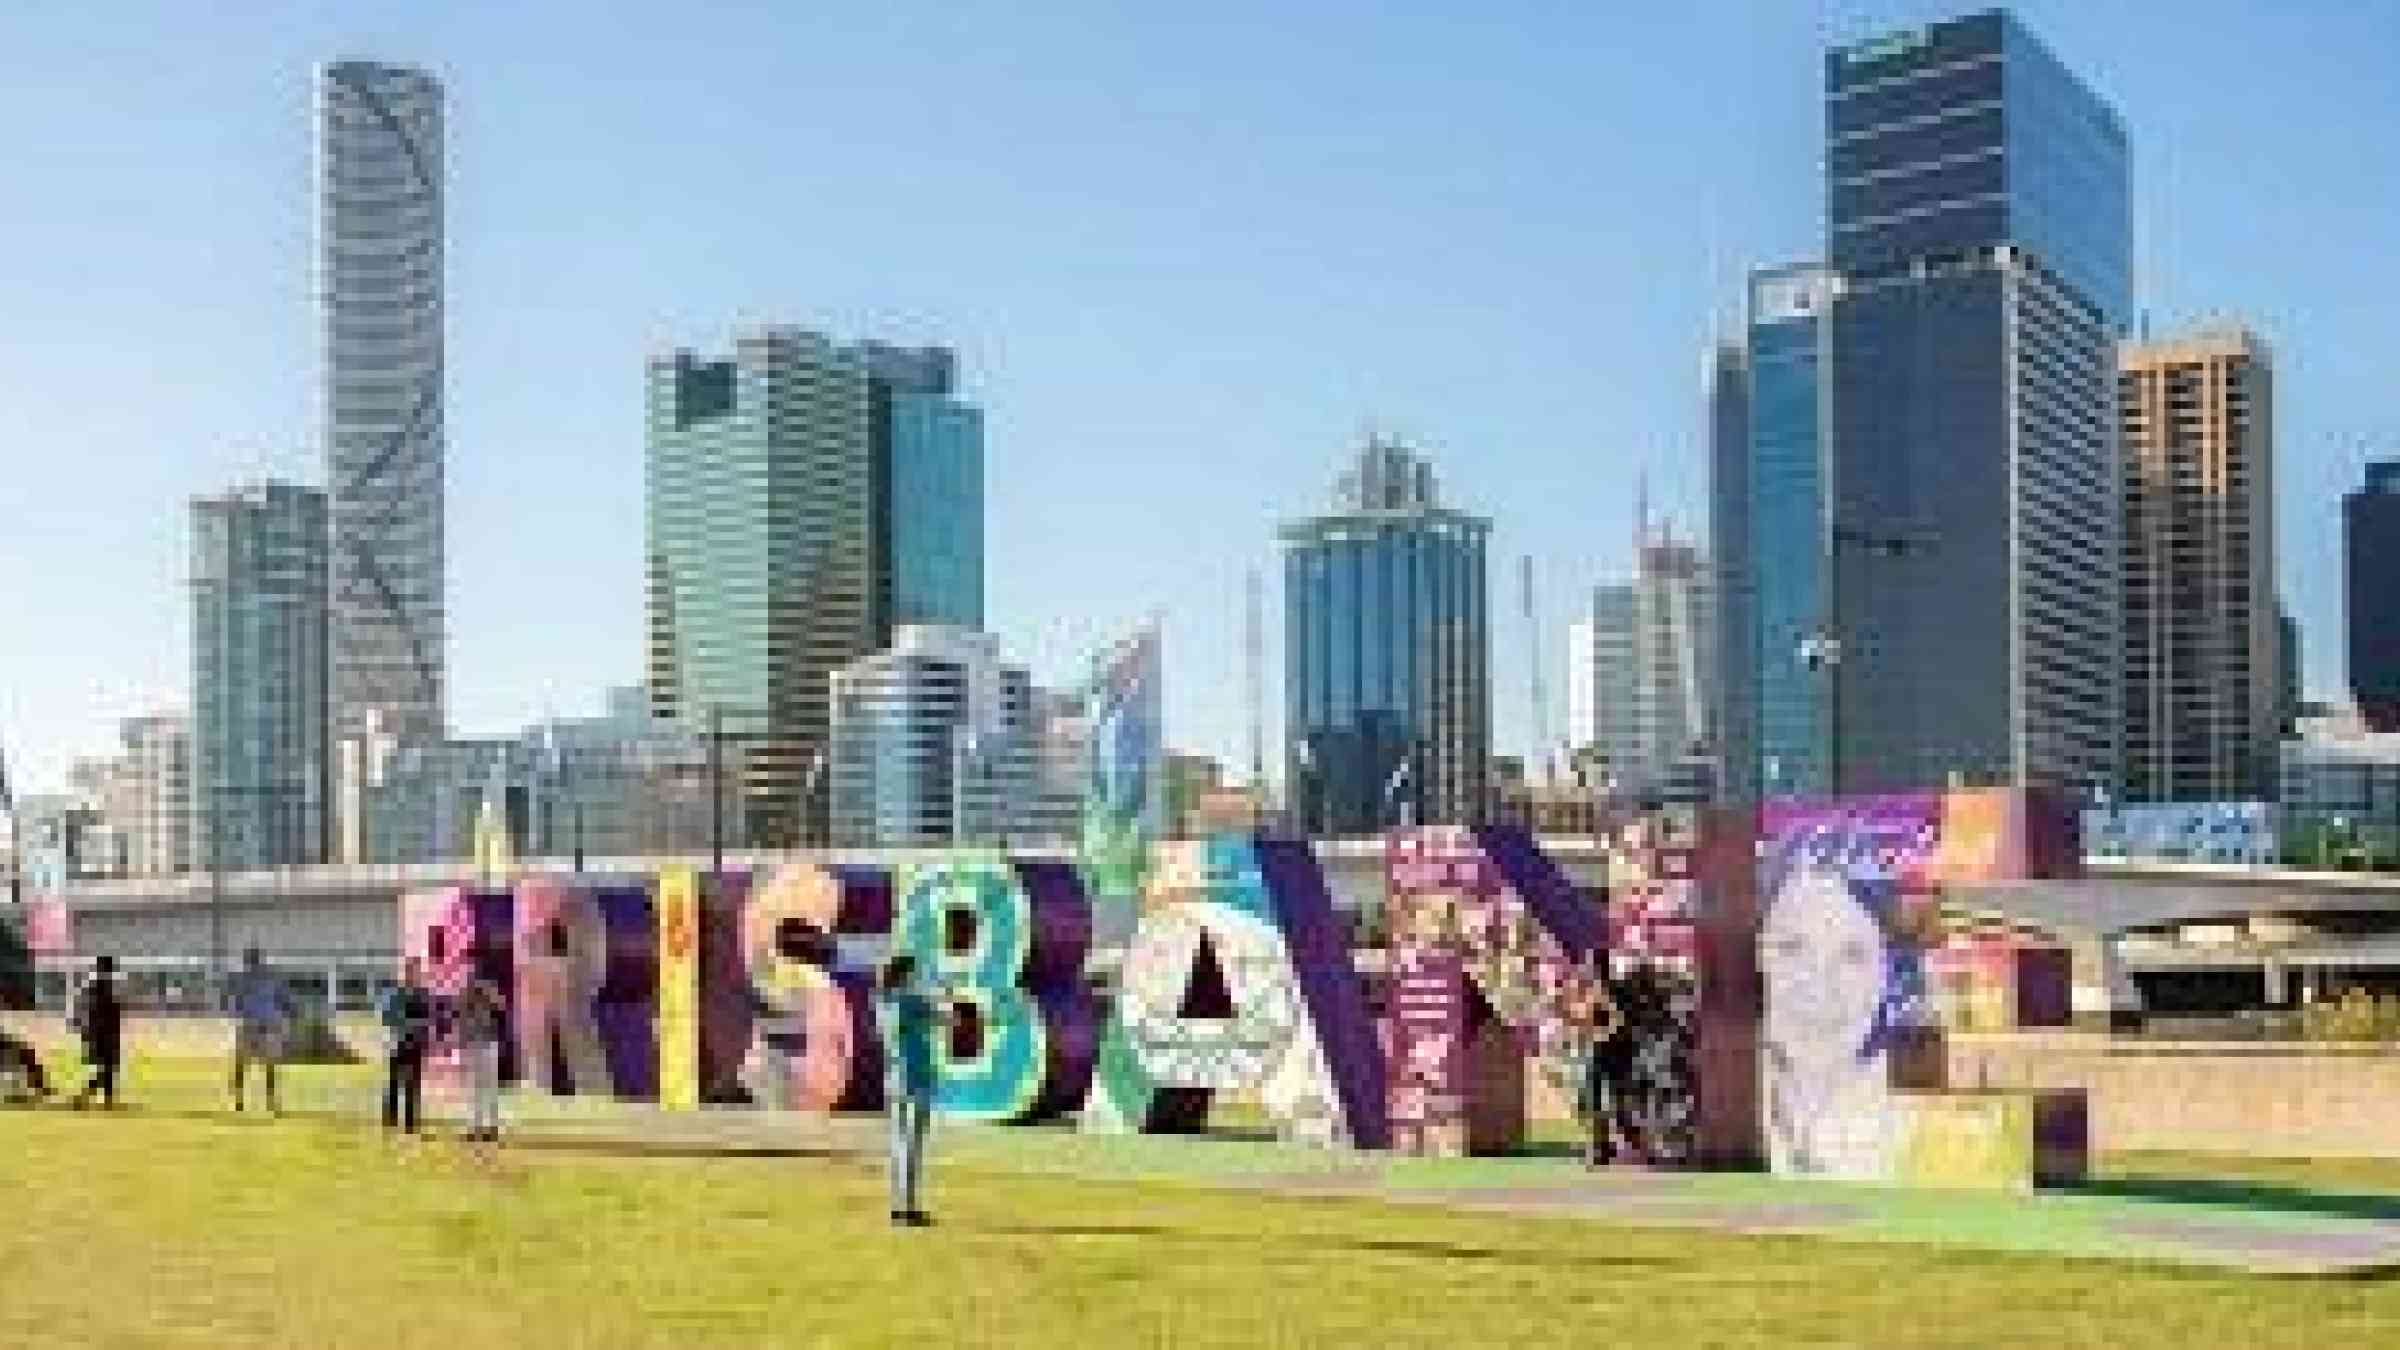 Brisbane is expecting over 2,000 delegates to attend the 2020 Asia-Pacific Minsiterial Conference on Disaster Risk Reduction